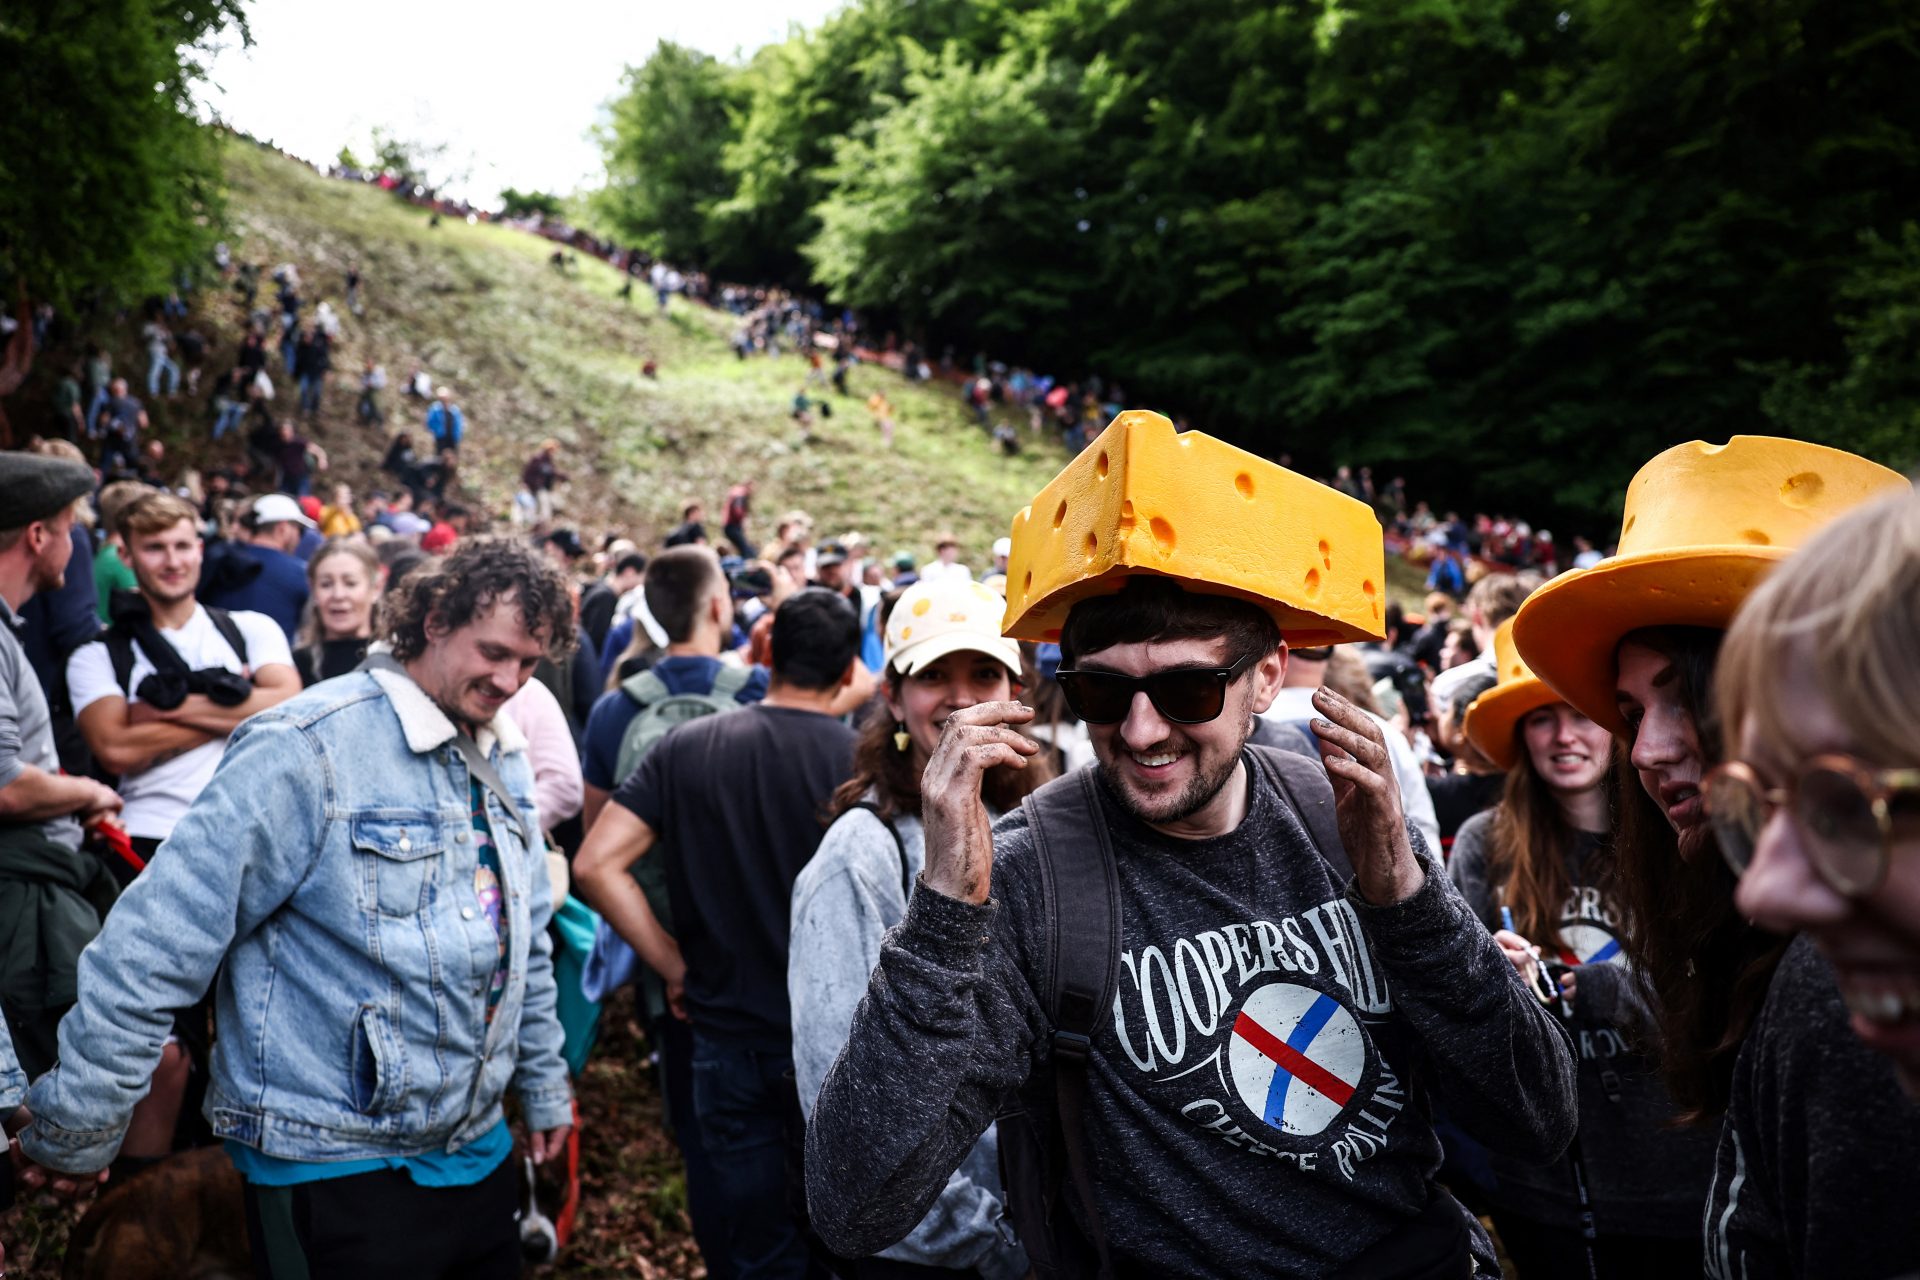 Gloucestershire's Chase the Cheese rolling attracts giant crowds from all over the world!